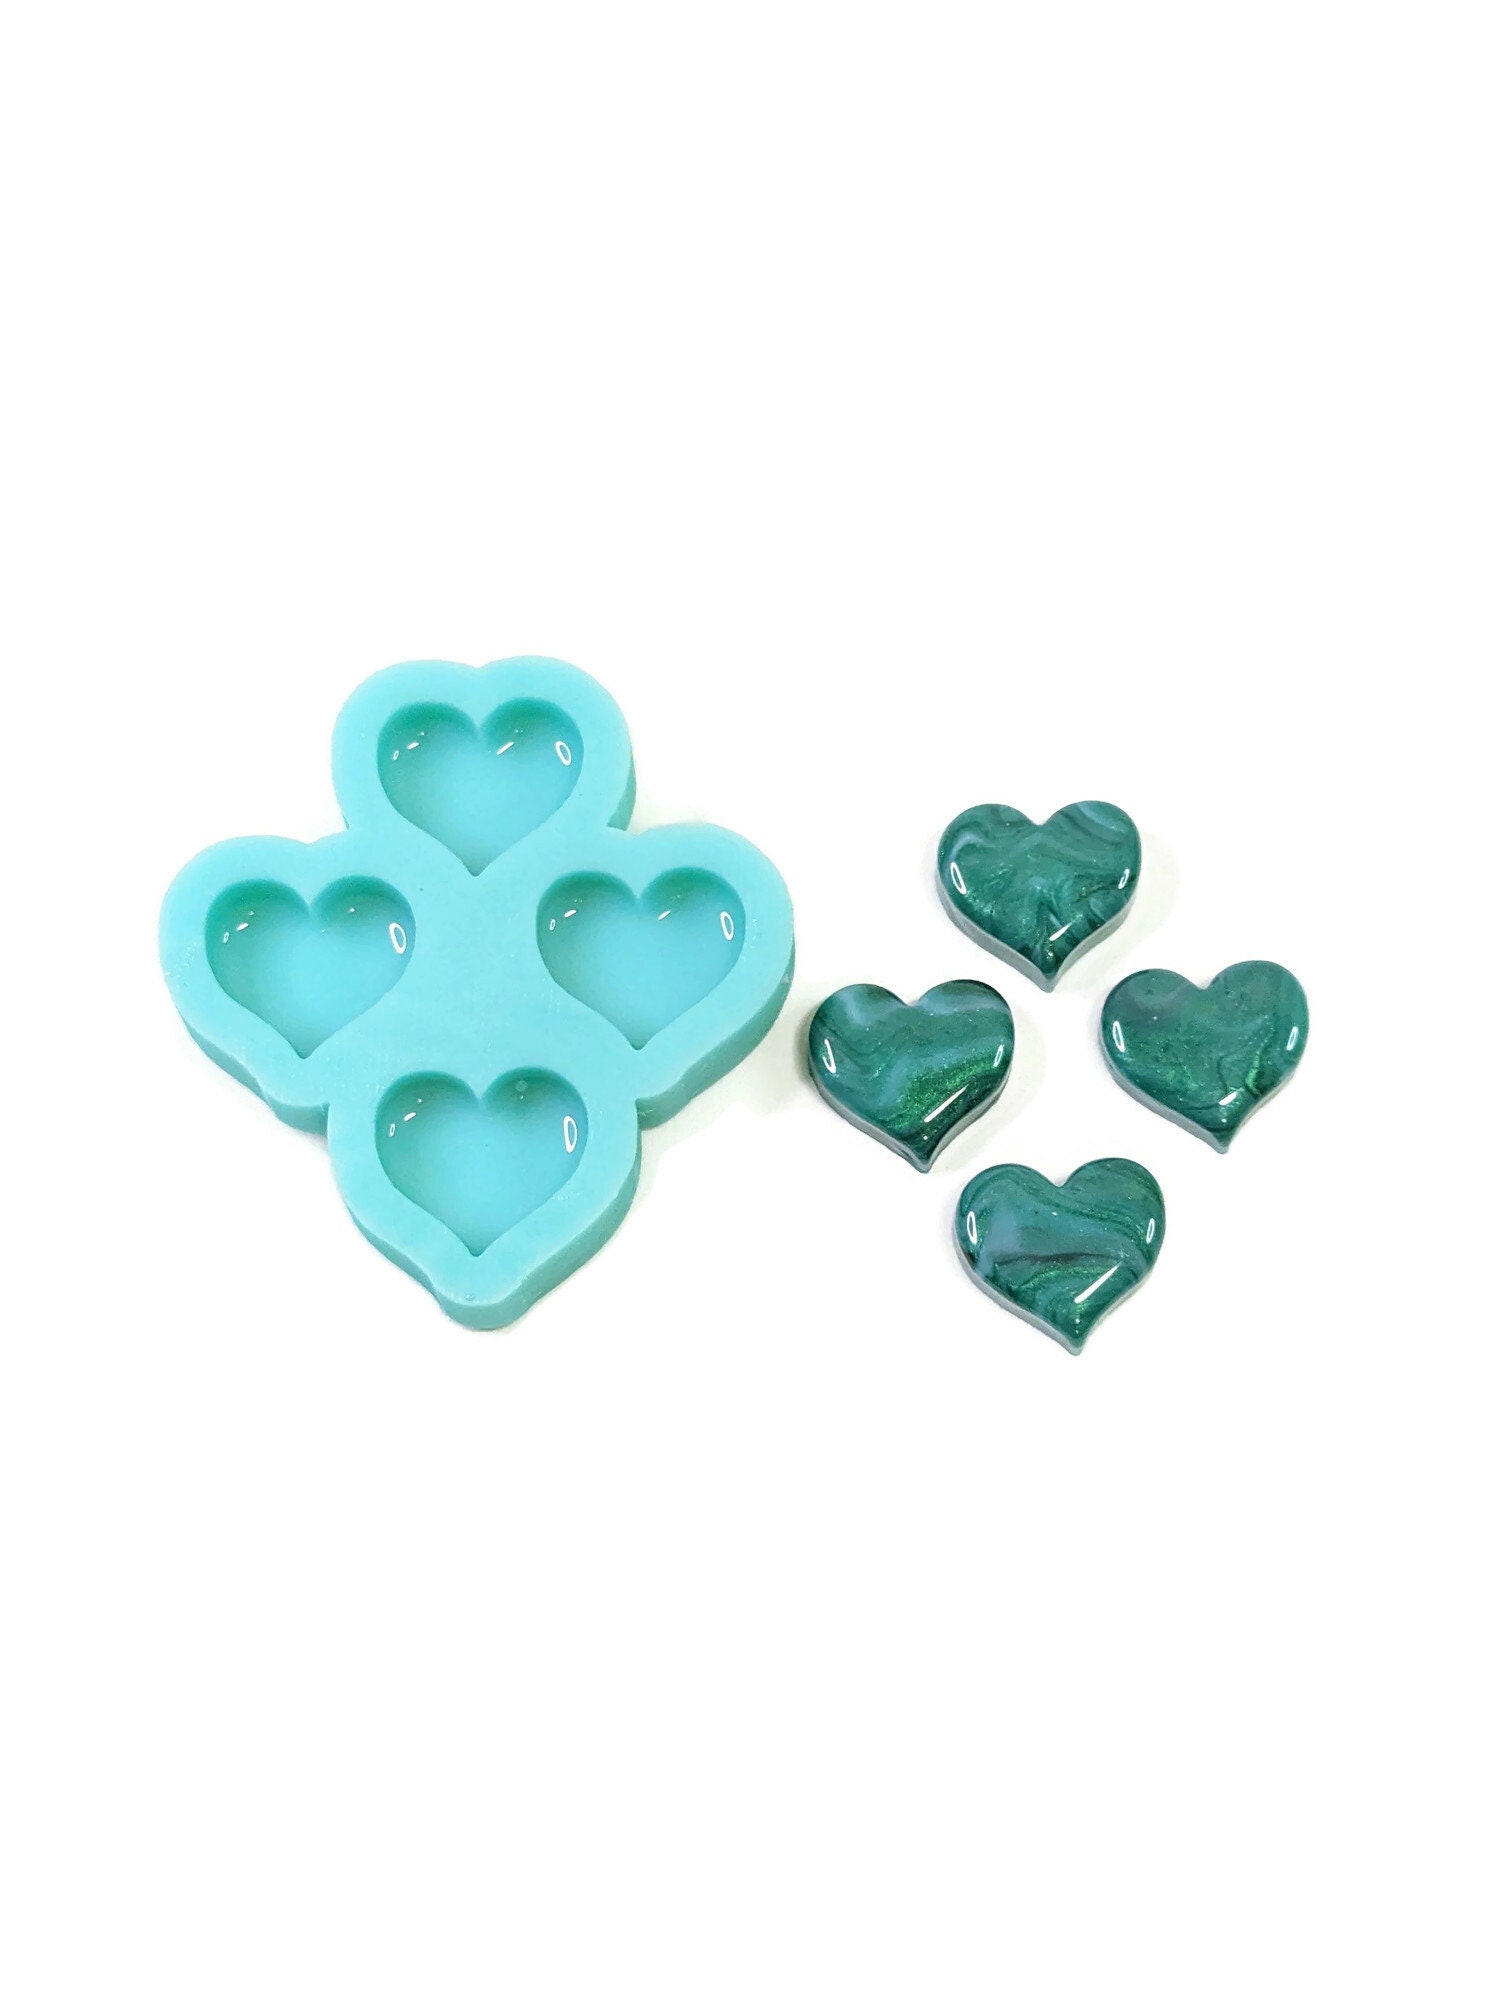 Silicone Mini Heart Molds,150 Cavity Chocolate Candy Ice Cube Jelly Cake  Pan Baking Molds For Birthday & Valentine'S Day Gifts